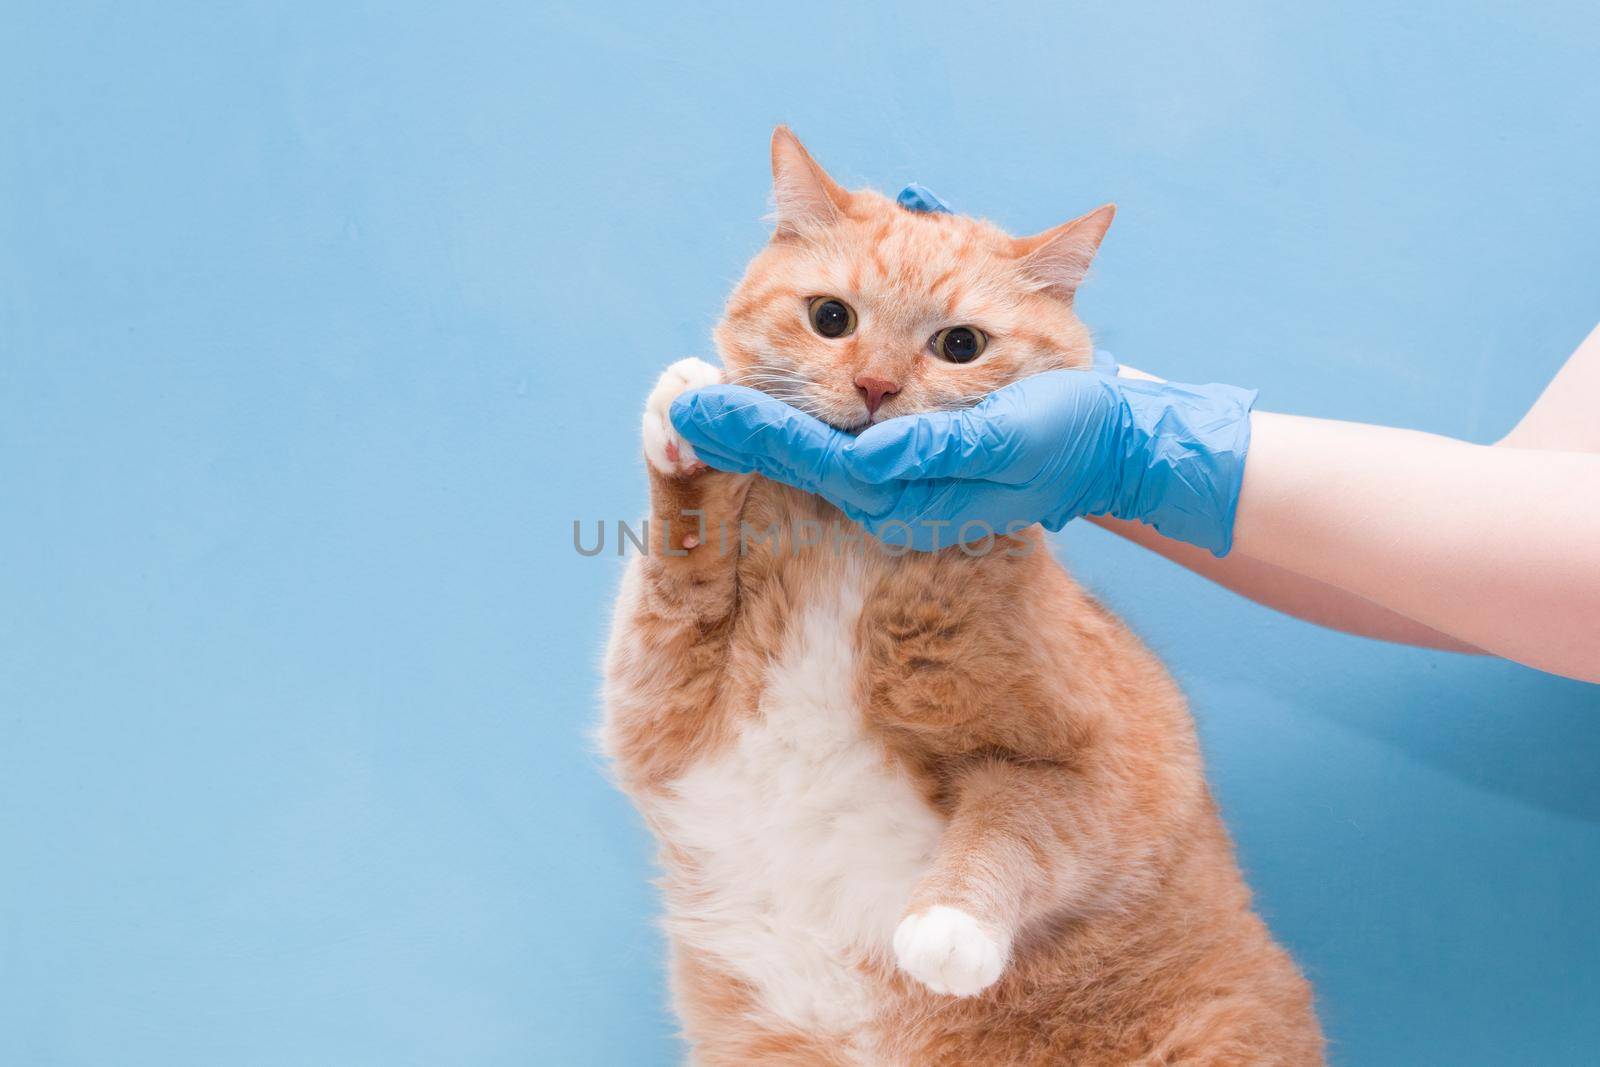 hands with disposable blue gloves are running behind the face of a ginger cute cat, veterinarian concept, blue background, copy space